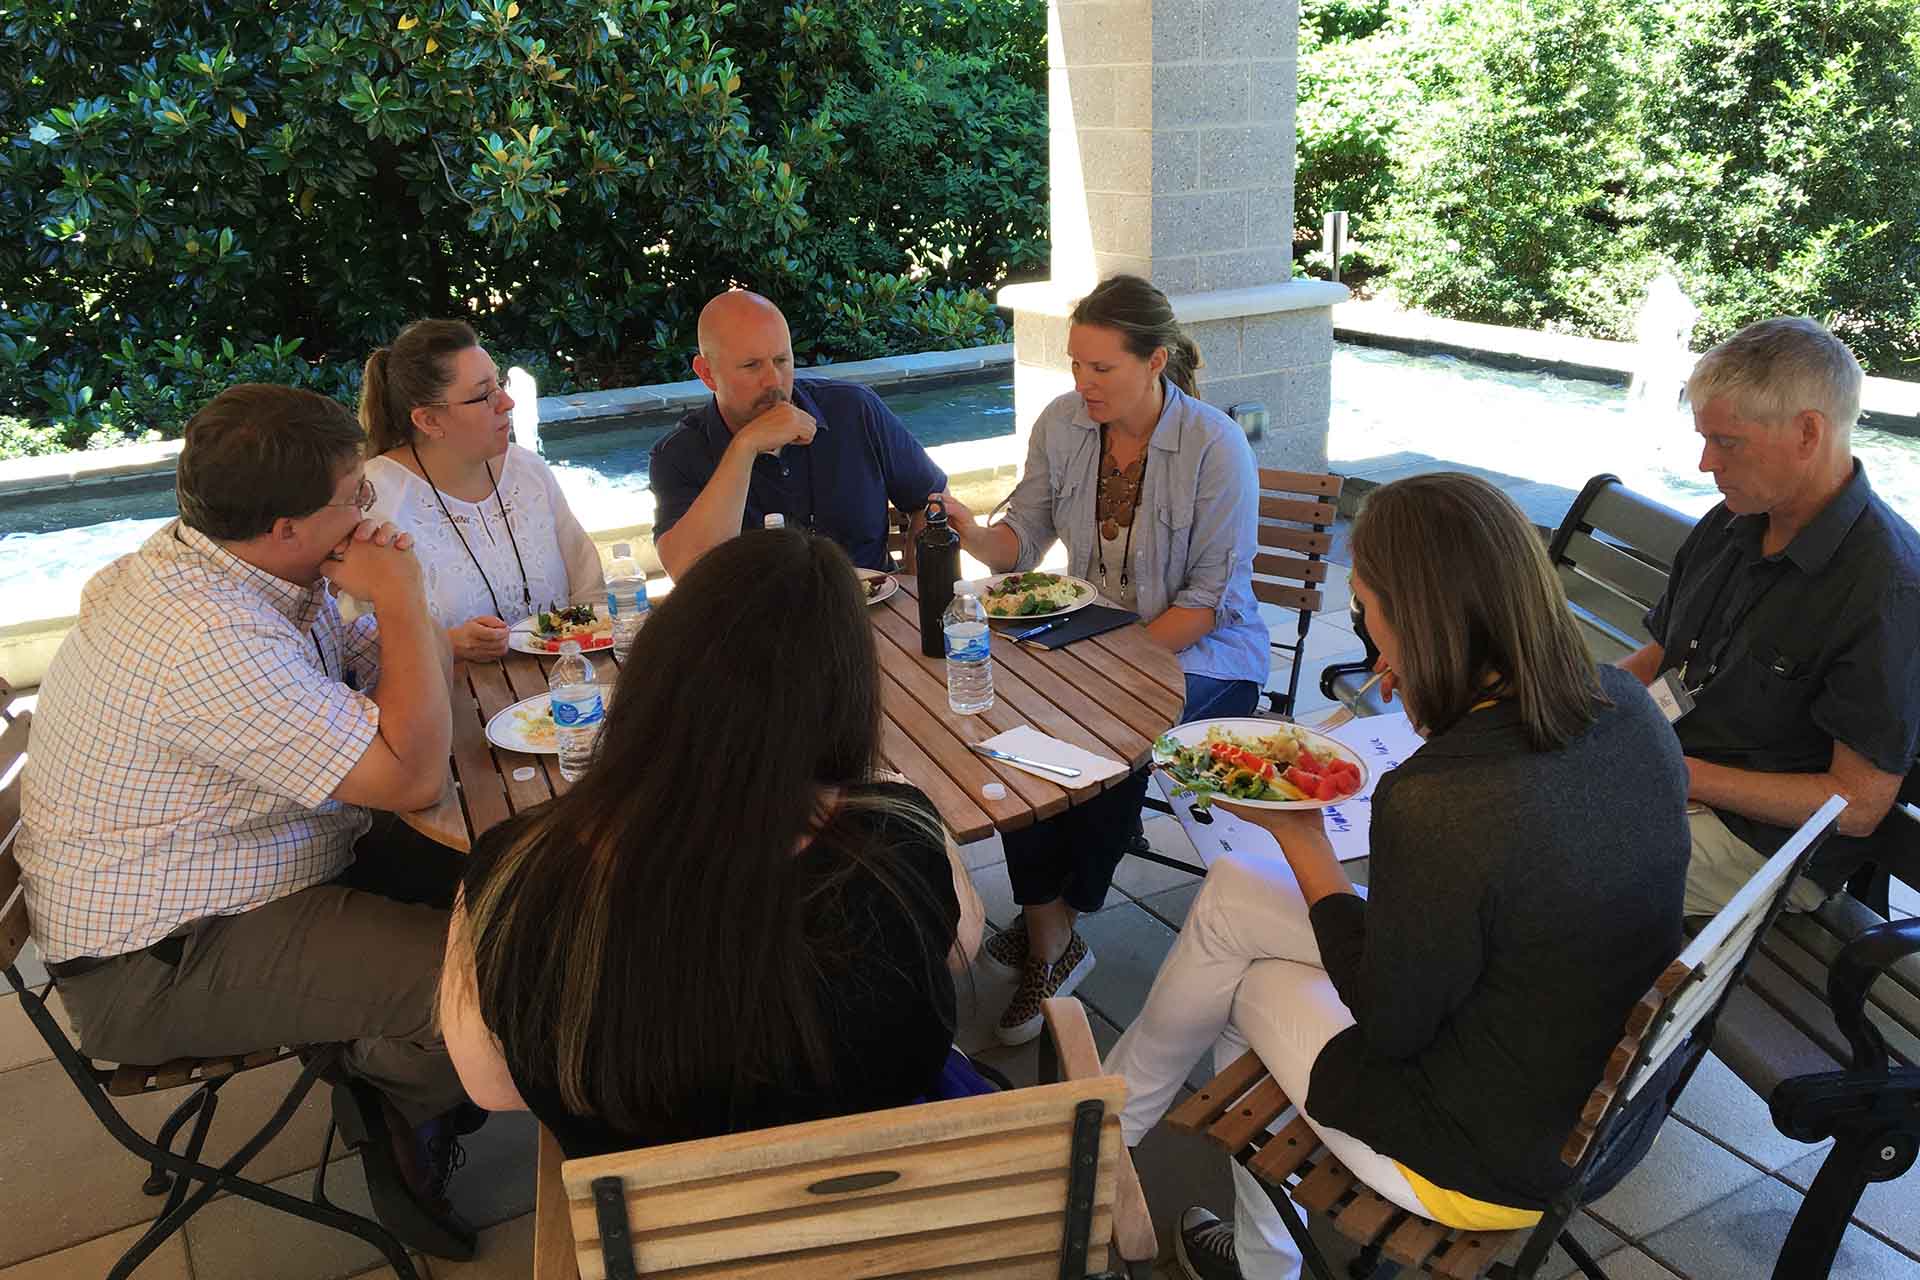 Mealtime on the patio of the Mary Black Foundation during the 2016 Gathering.